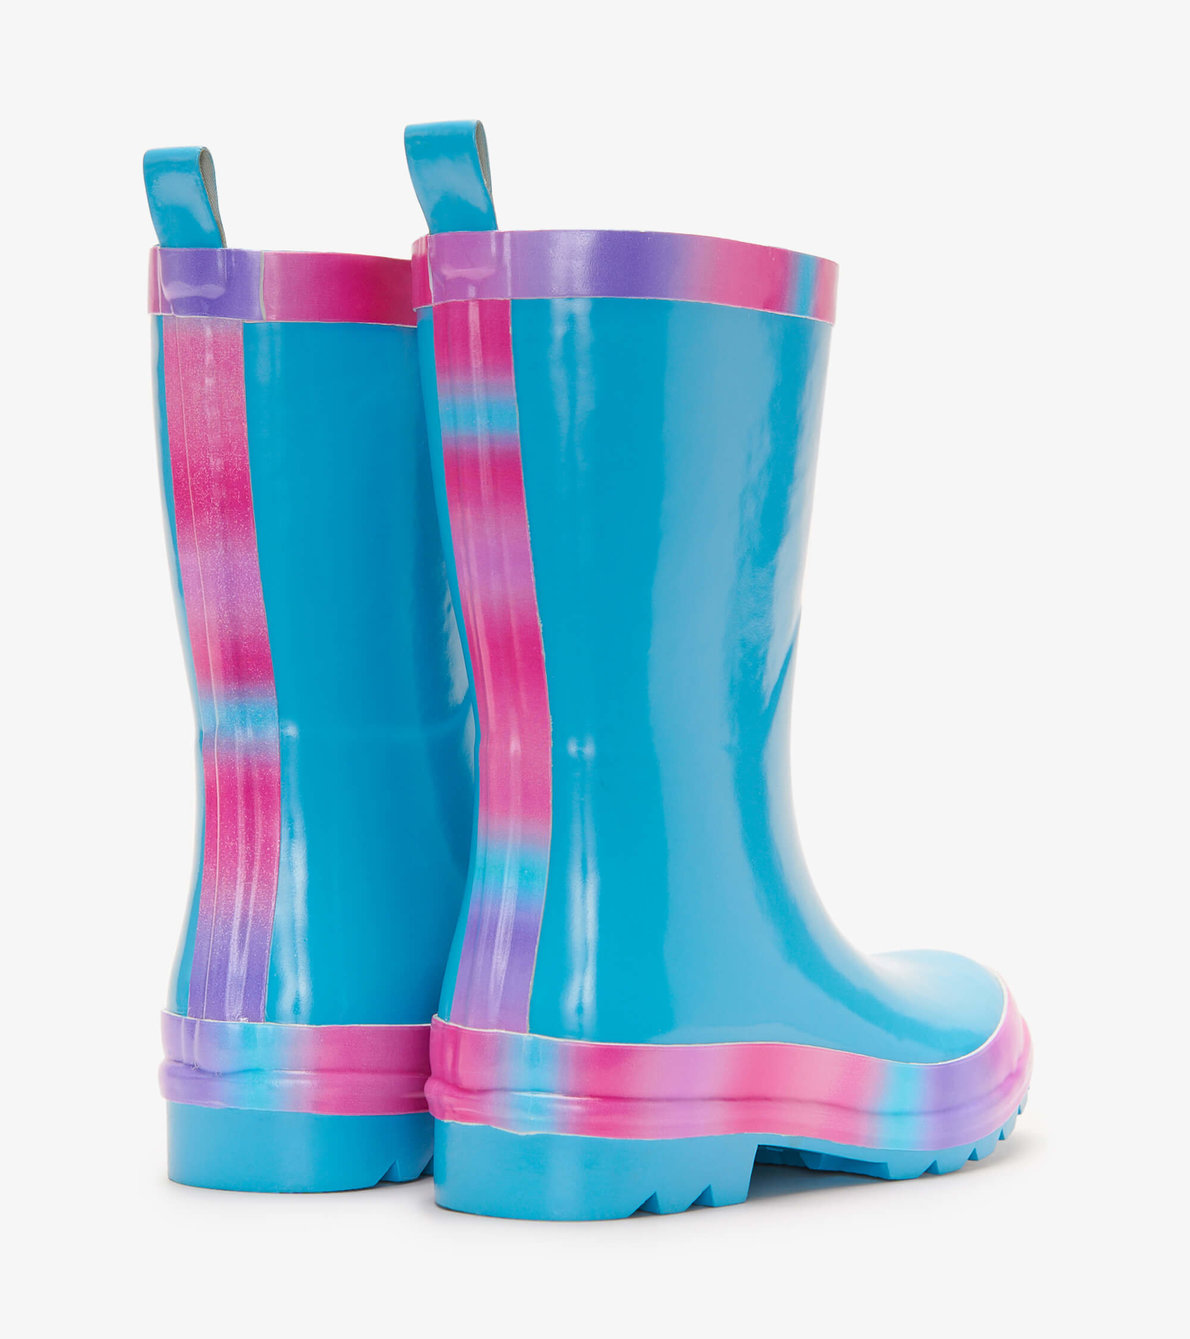 View larger image of Fun Hearts Gradient Shiny Kids Wellies